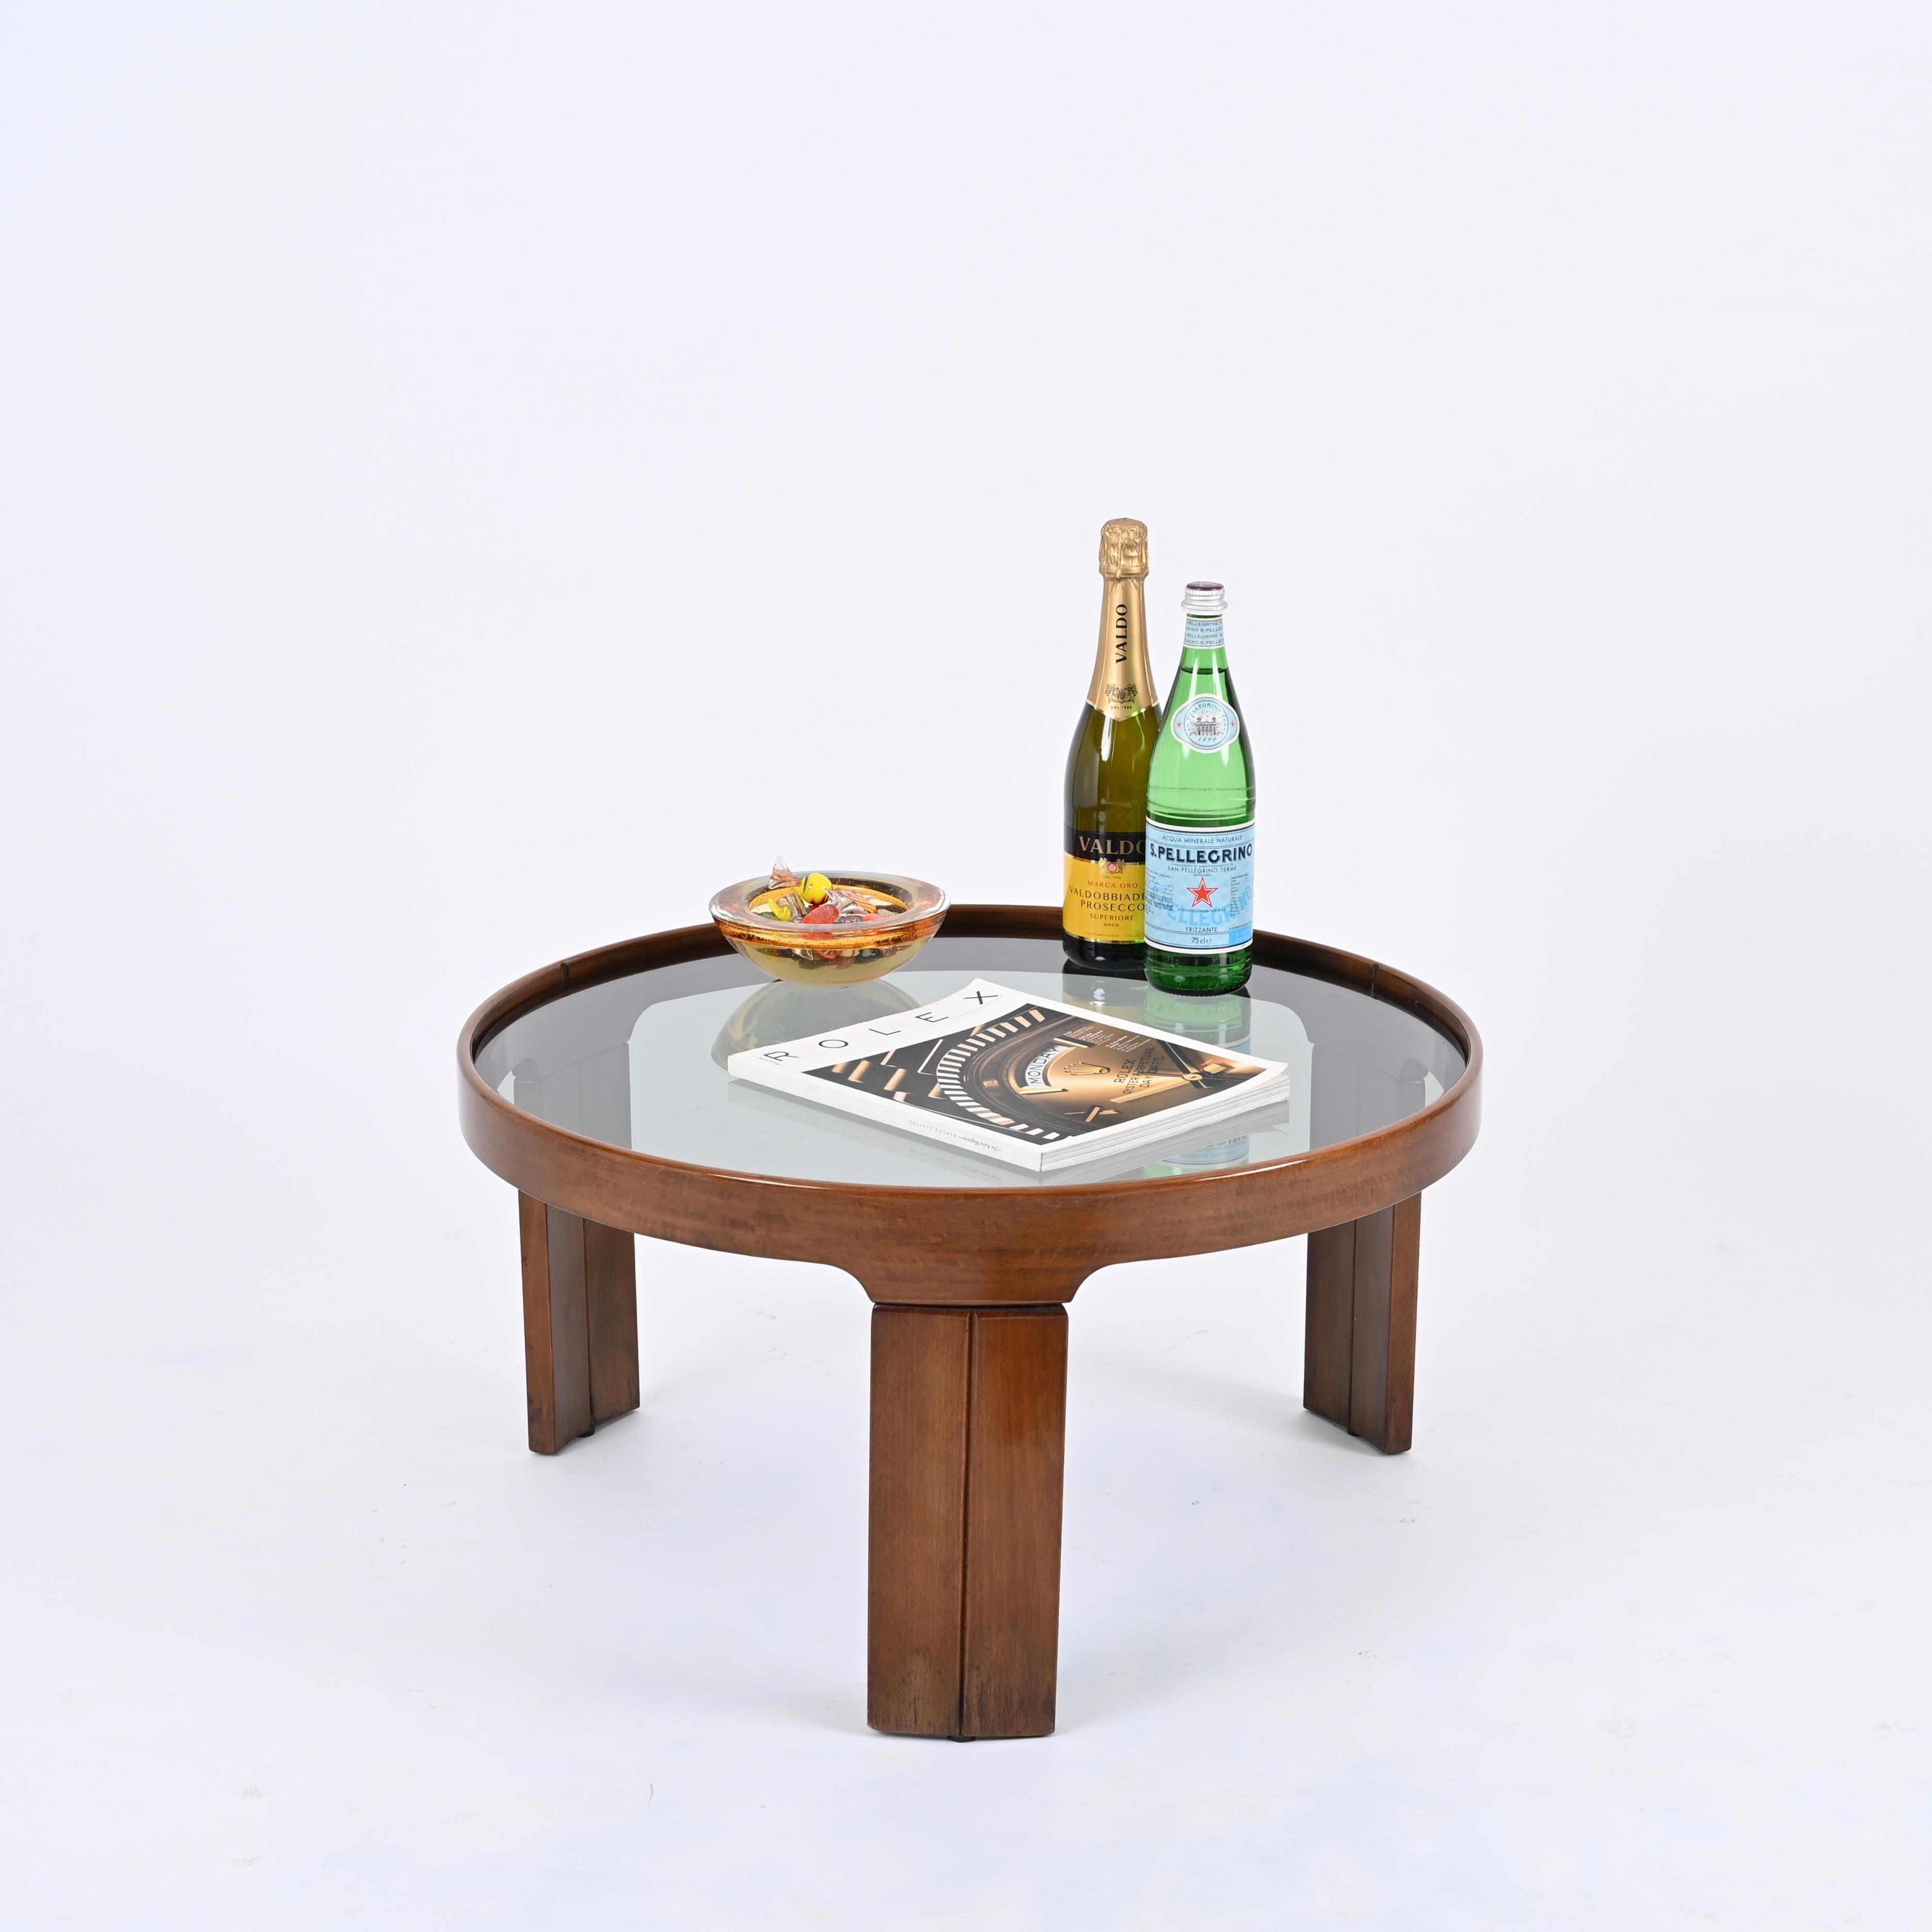 Gorgeous mid-century round tripod coffee table with smoked glass top. This stunning piece was produced by Molteni in Italy in the 1960s.  

Fully made in walnut, this side table features and incredibly elegant design, with three sturdy legs